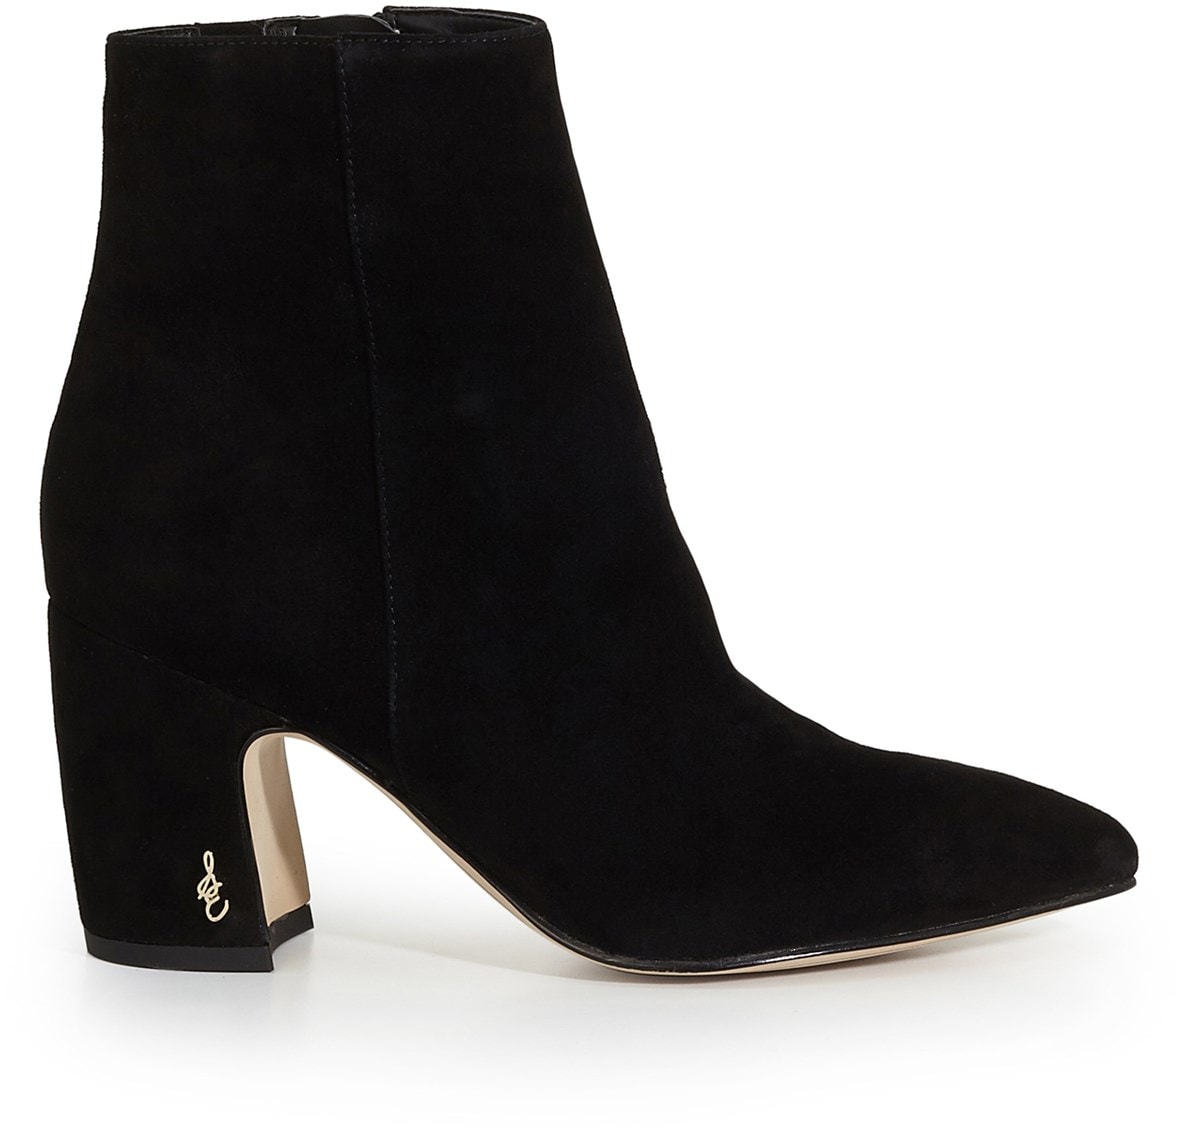 over the ankle black boots